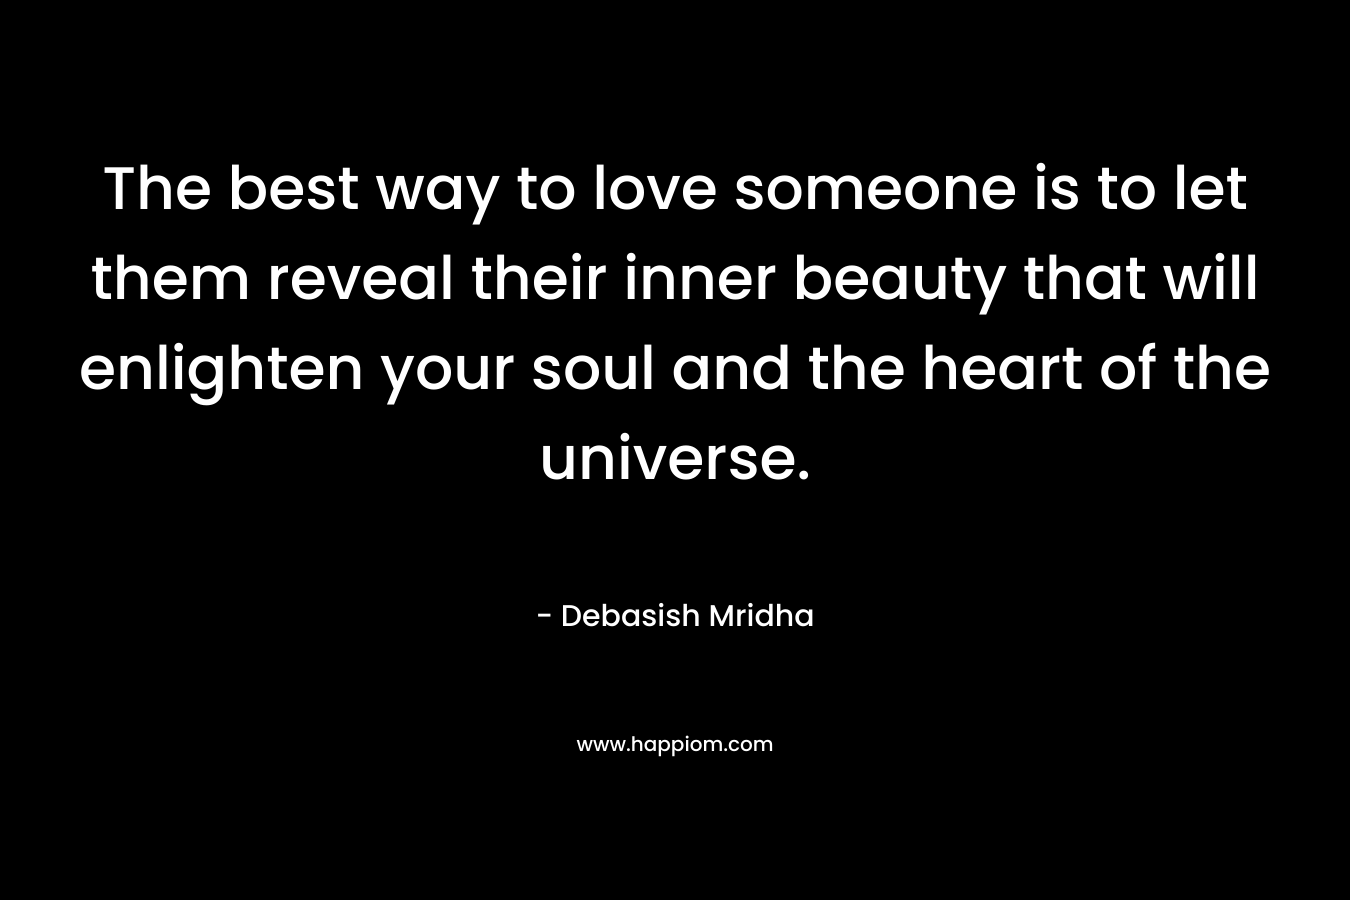 The best way to love someone is to let them reveal their inner beauty that will enlighten your soul and the heart of the universe.